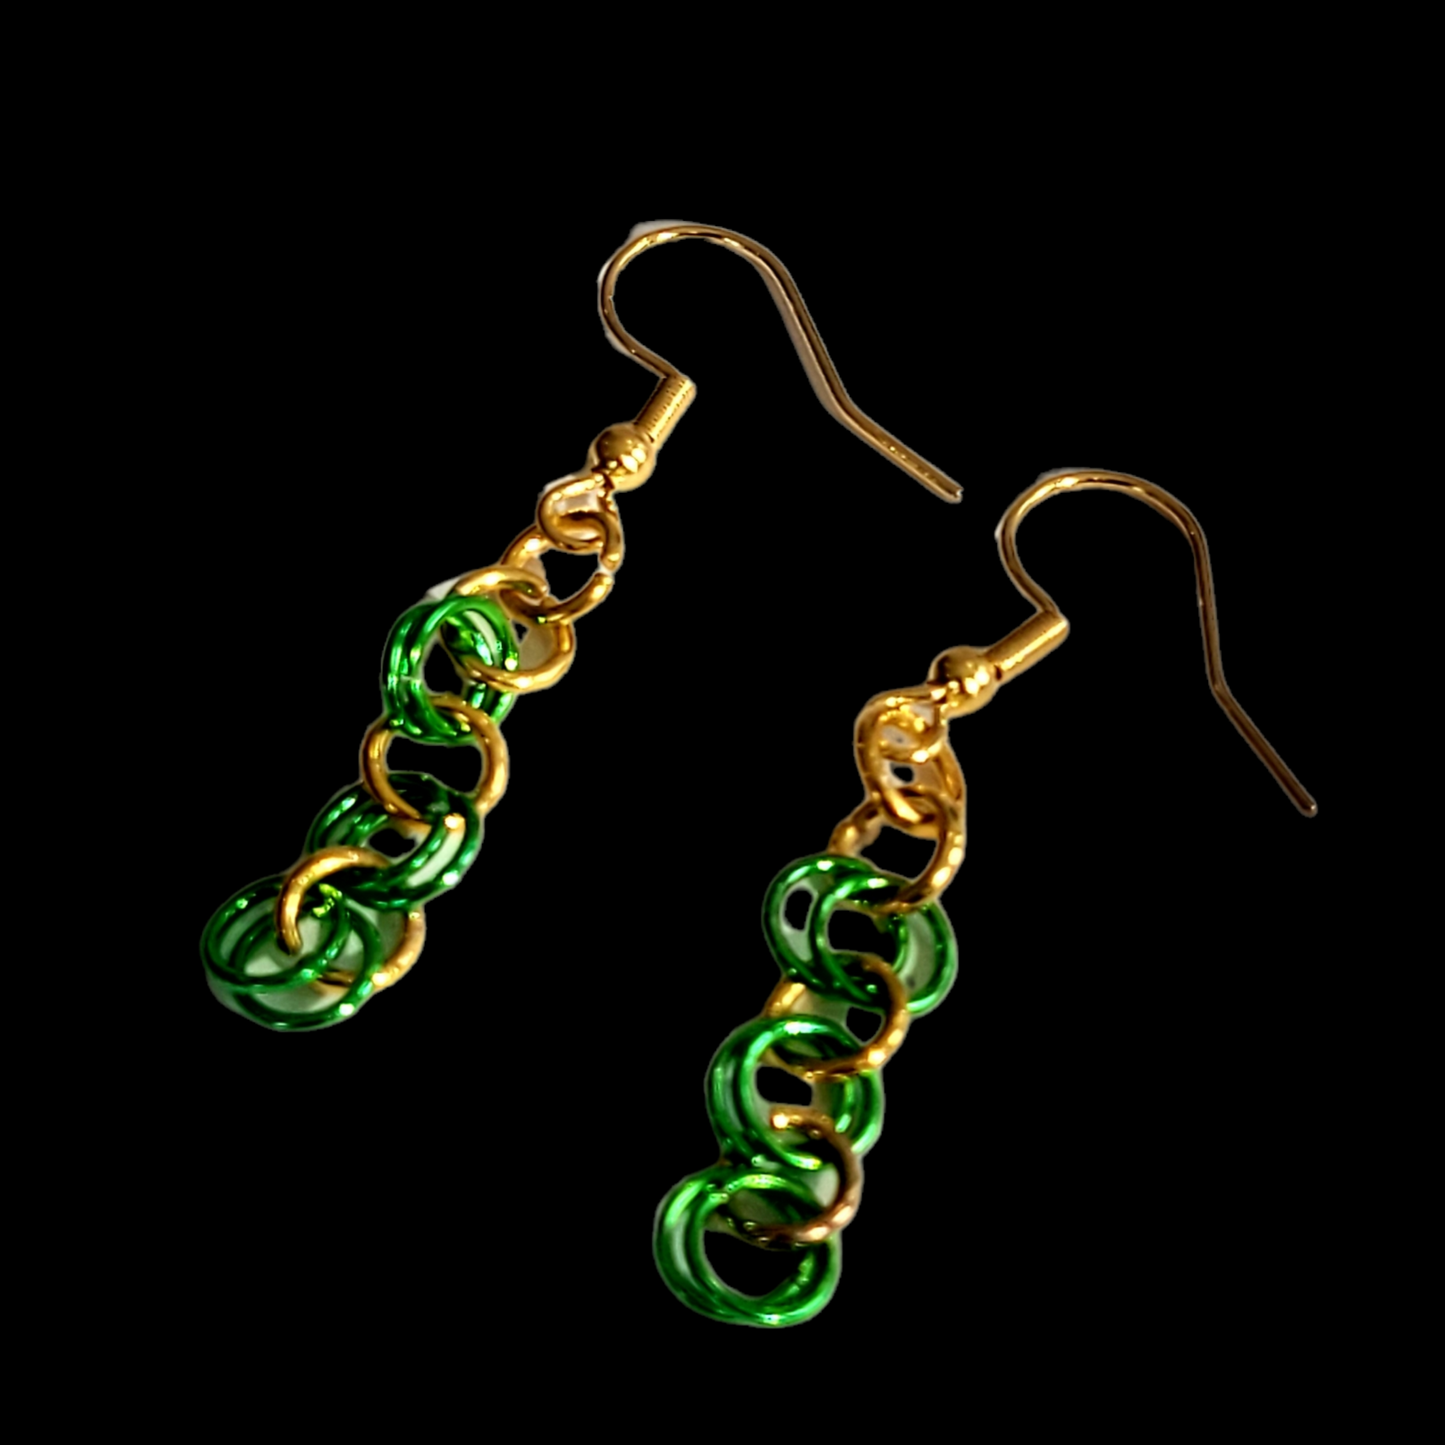 Earrings, green and gold chainmail